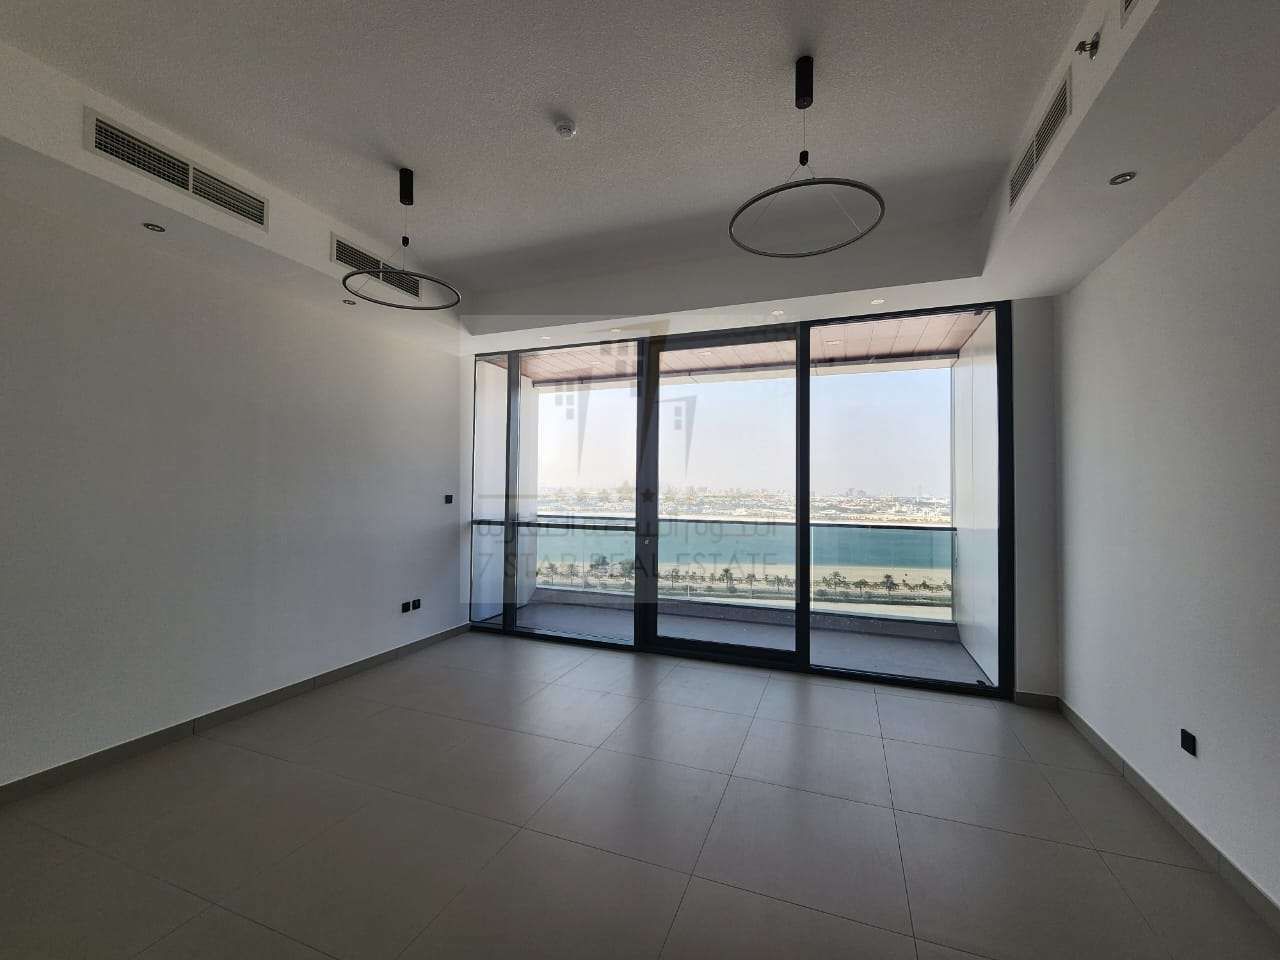 2 BR  Apartment For Sale in La Plage Tower